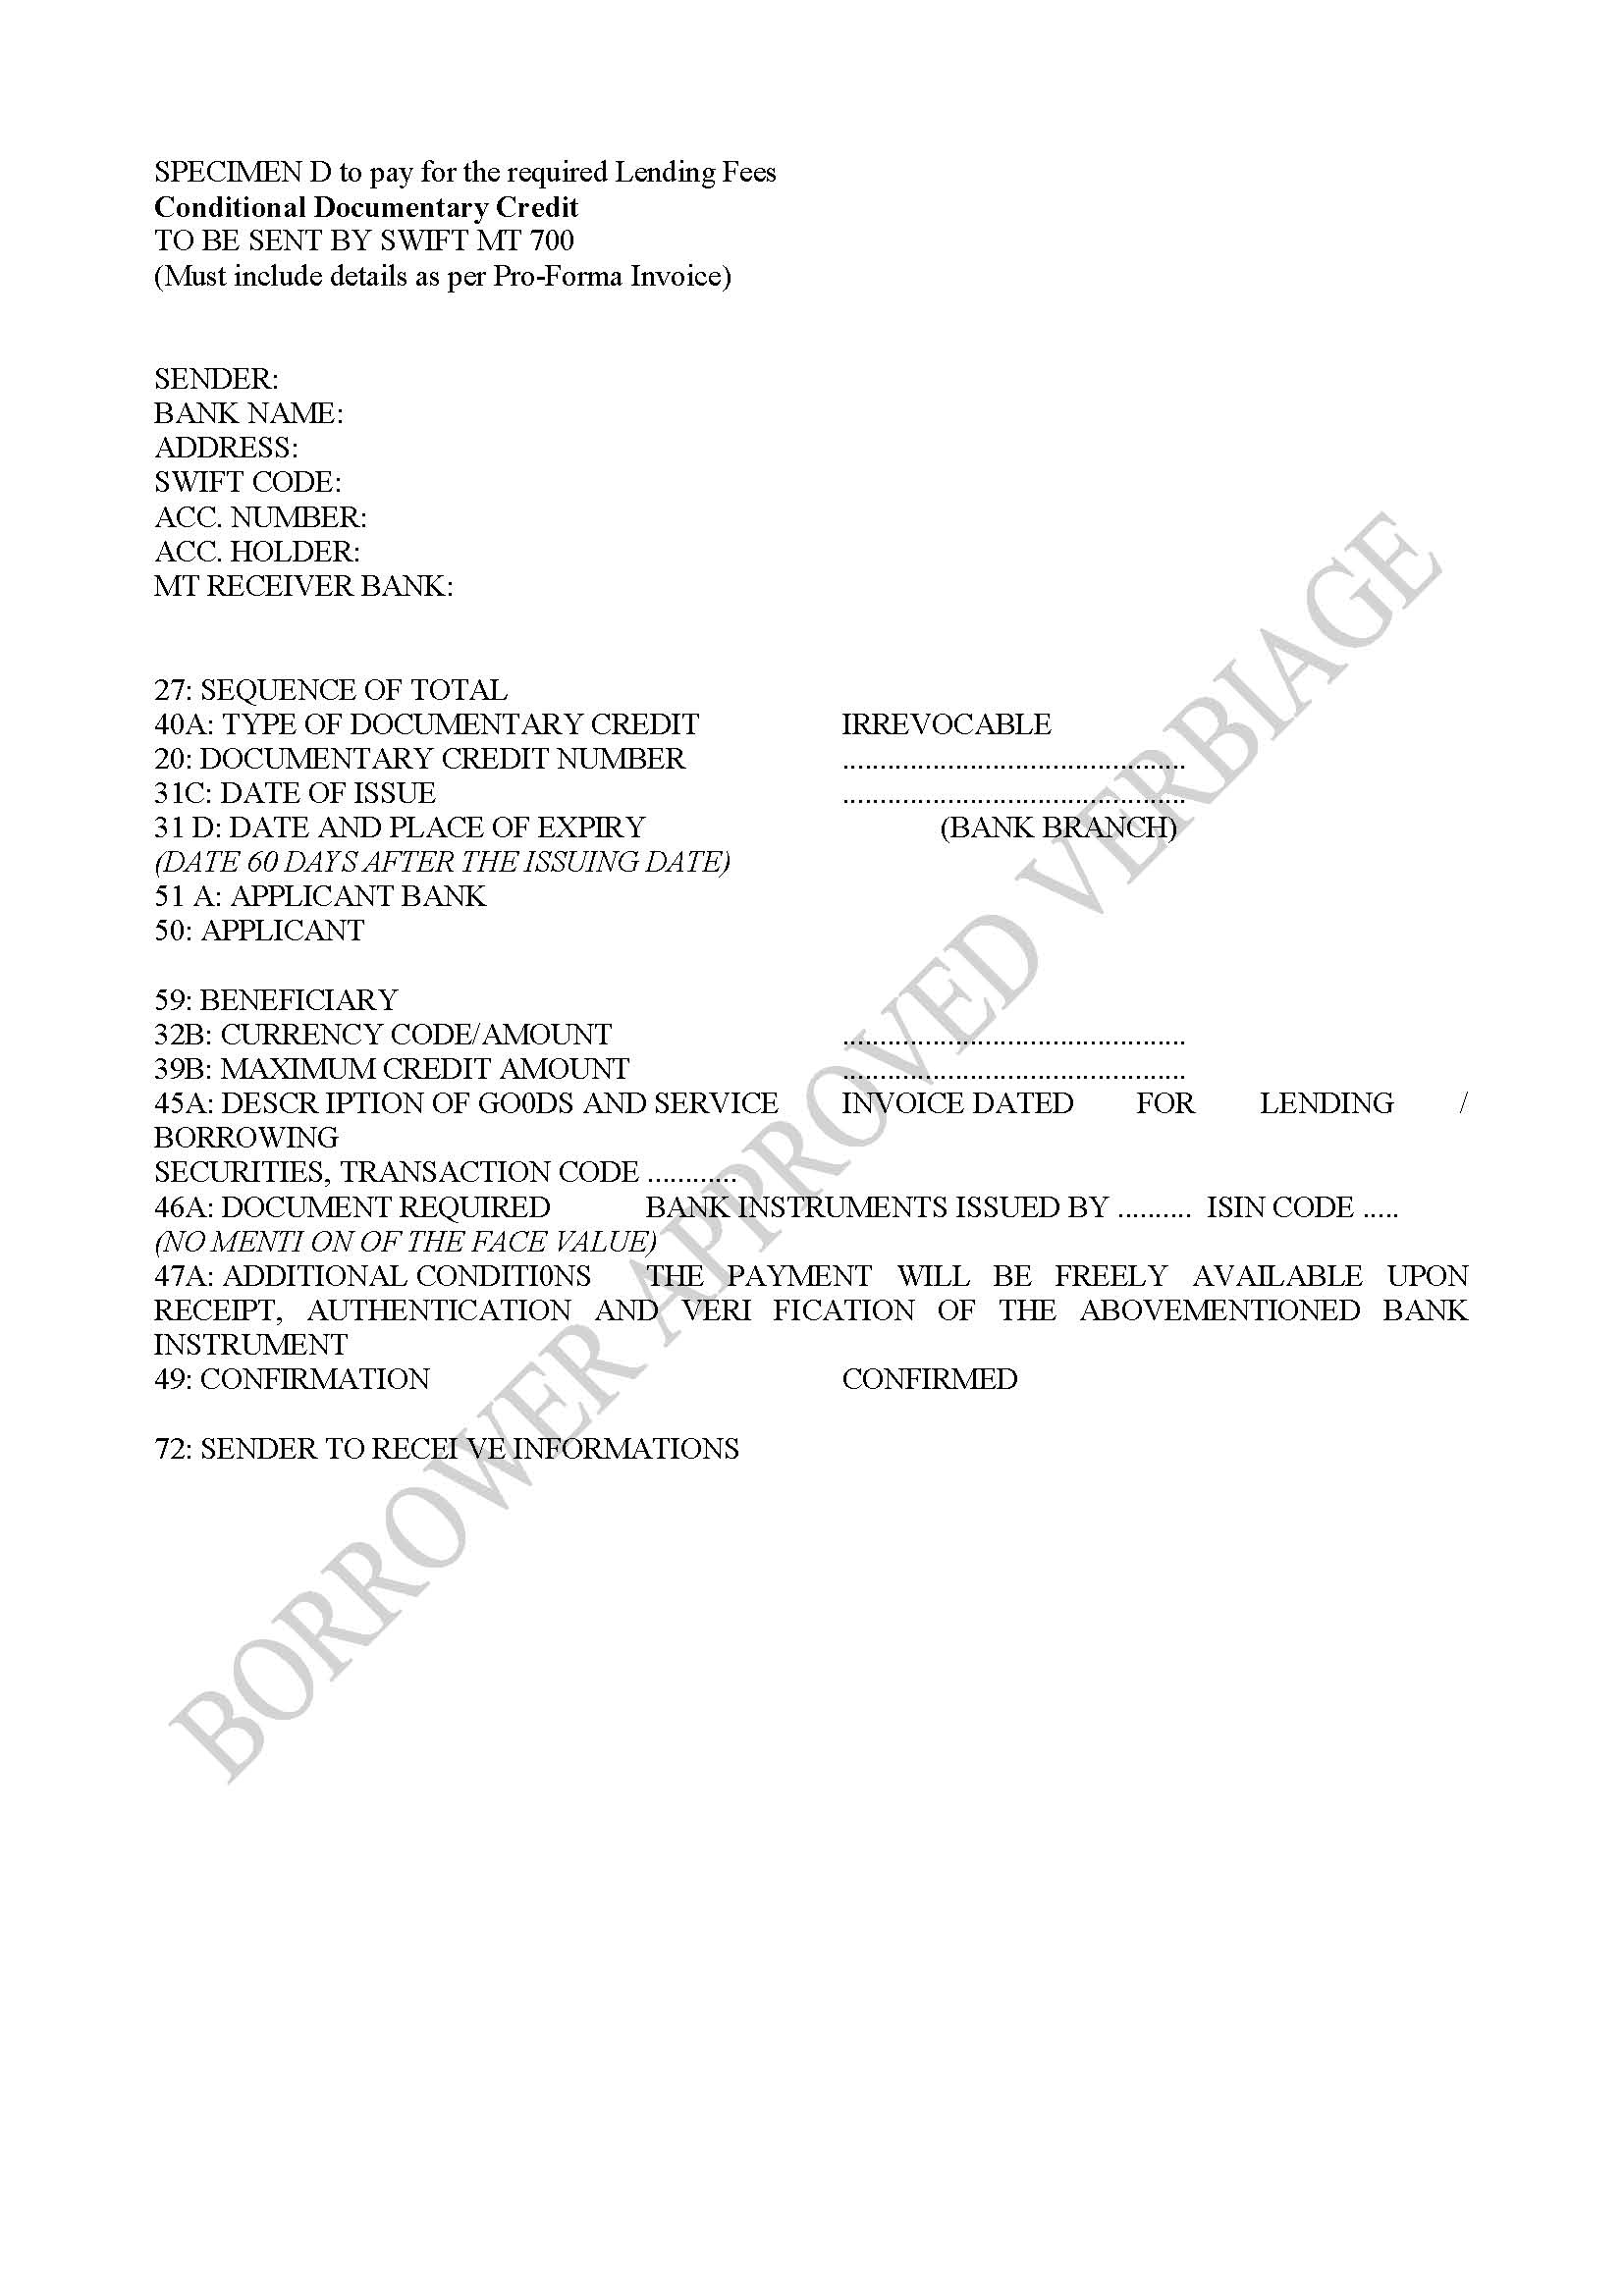 BUSINESS SUPPORT CONTRACT (ALL SPECIMEN)_Seite_4